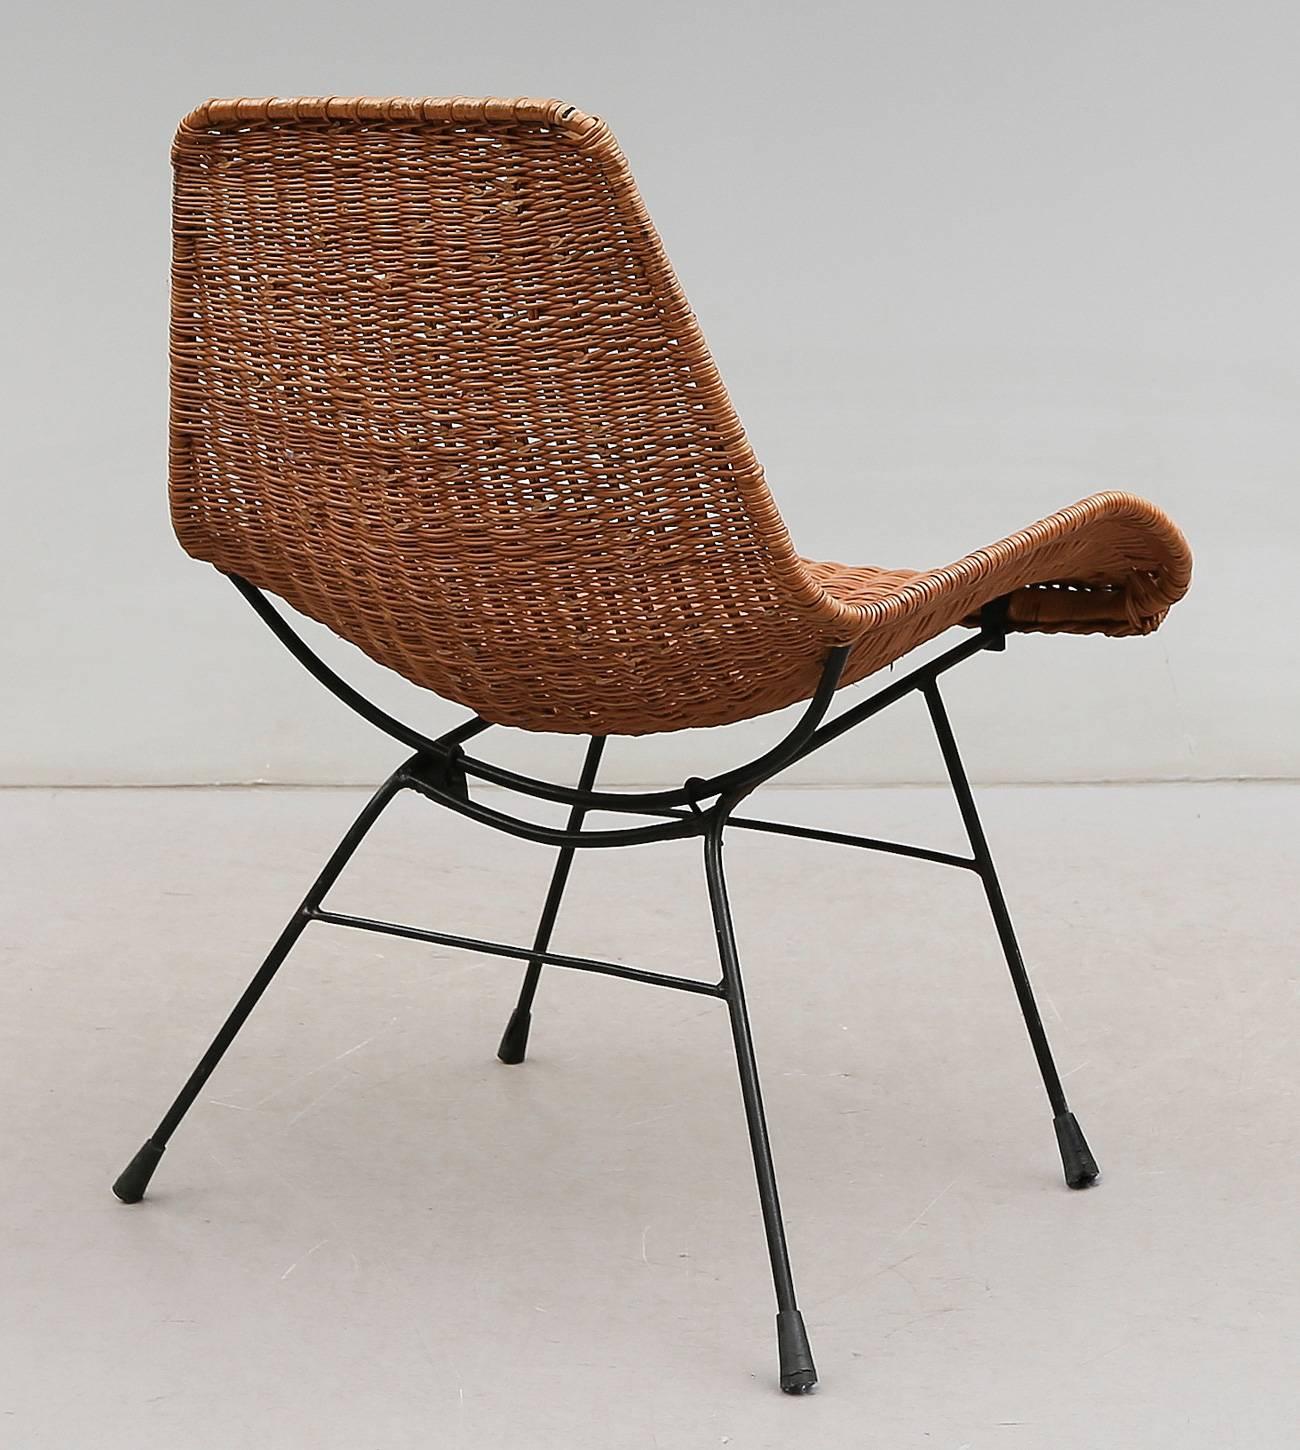 Rare easy chair model designed by Swedish modernist architect and designer Kerstin Hörlin-Holmqvist in early 1950s, manufactured in wicker and black iron.